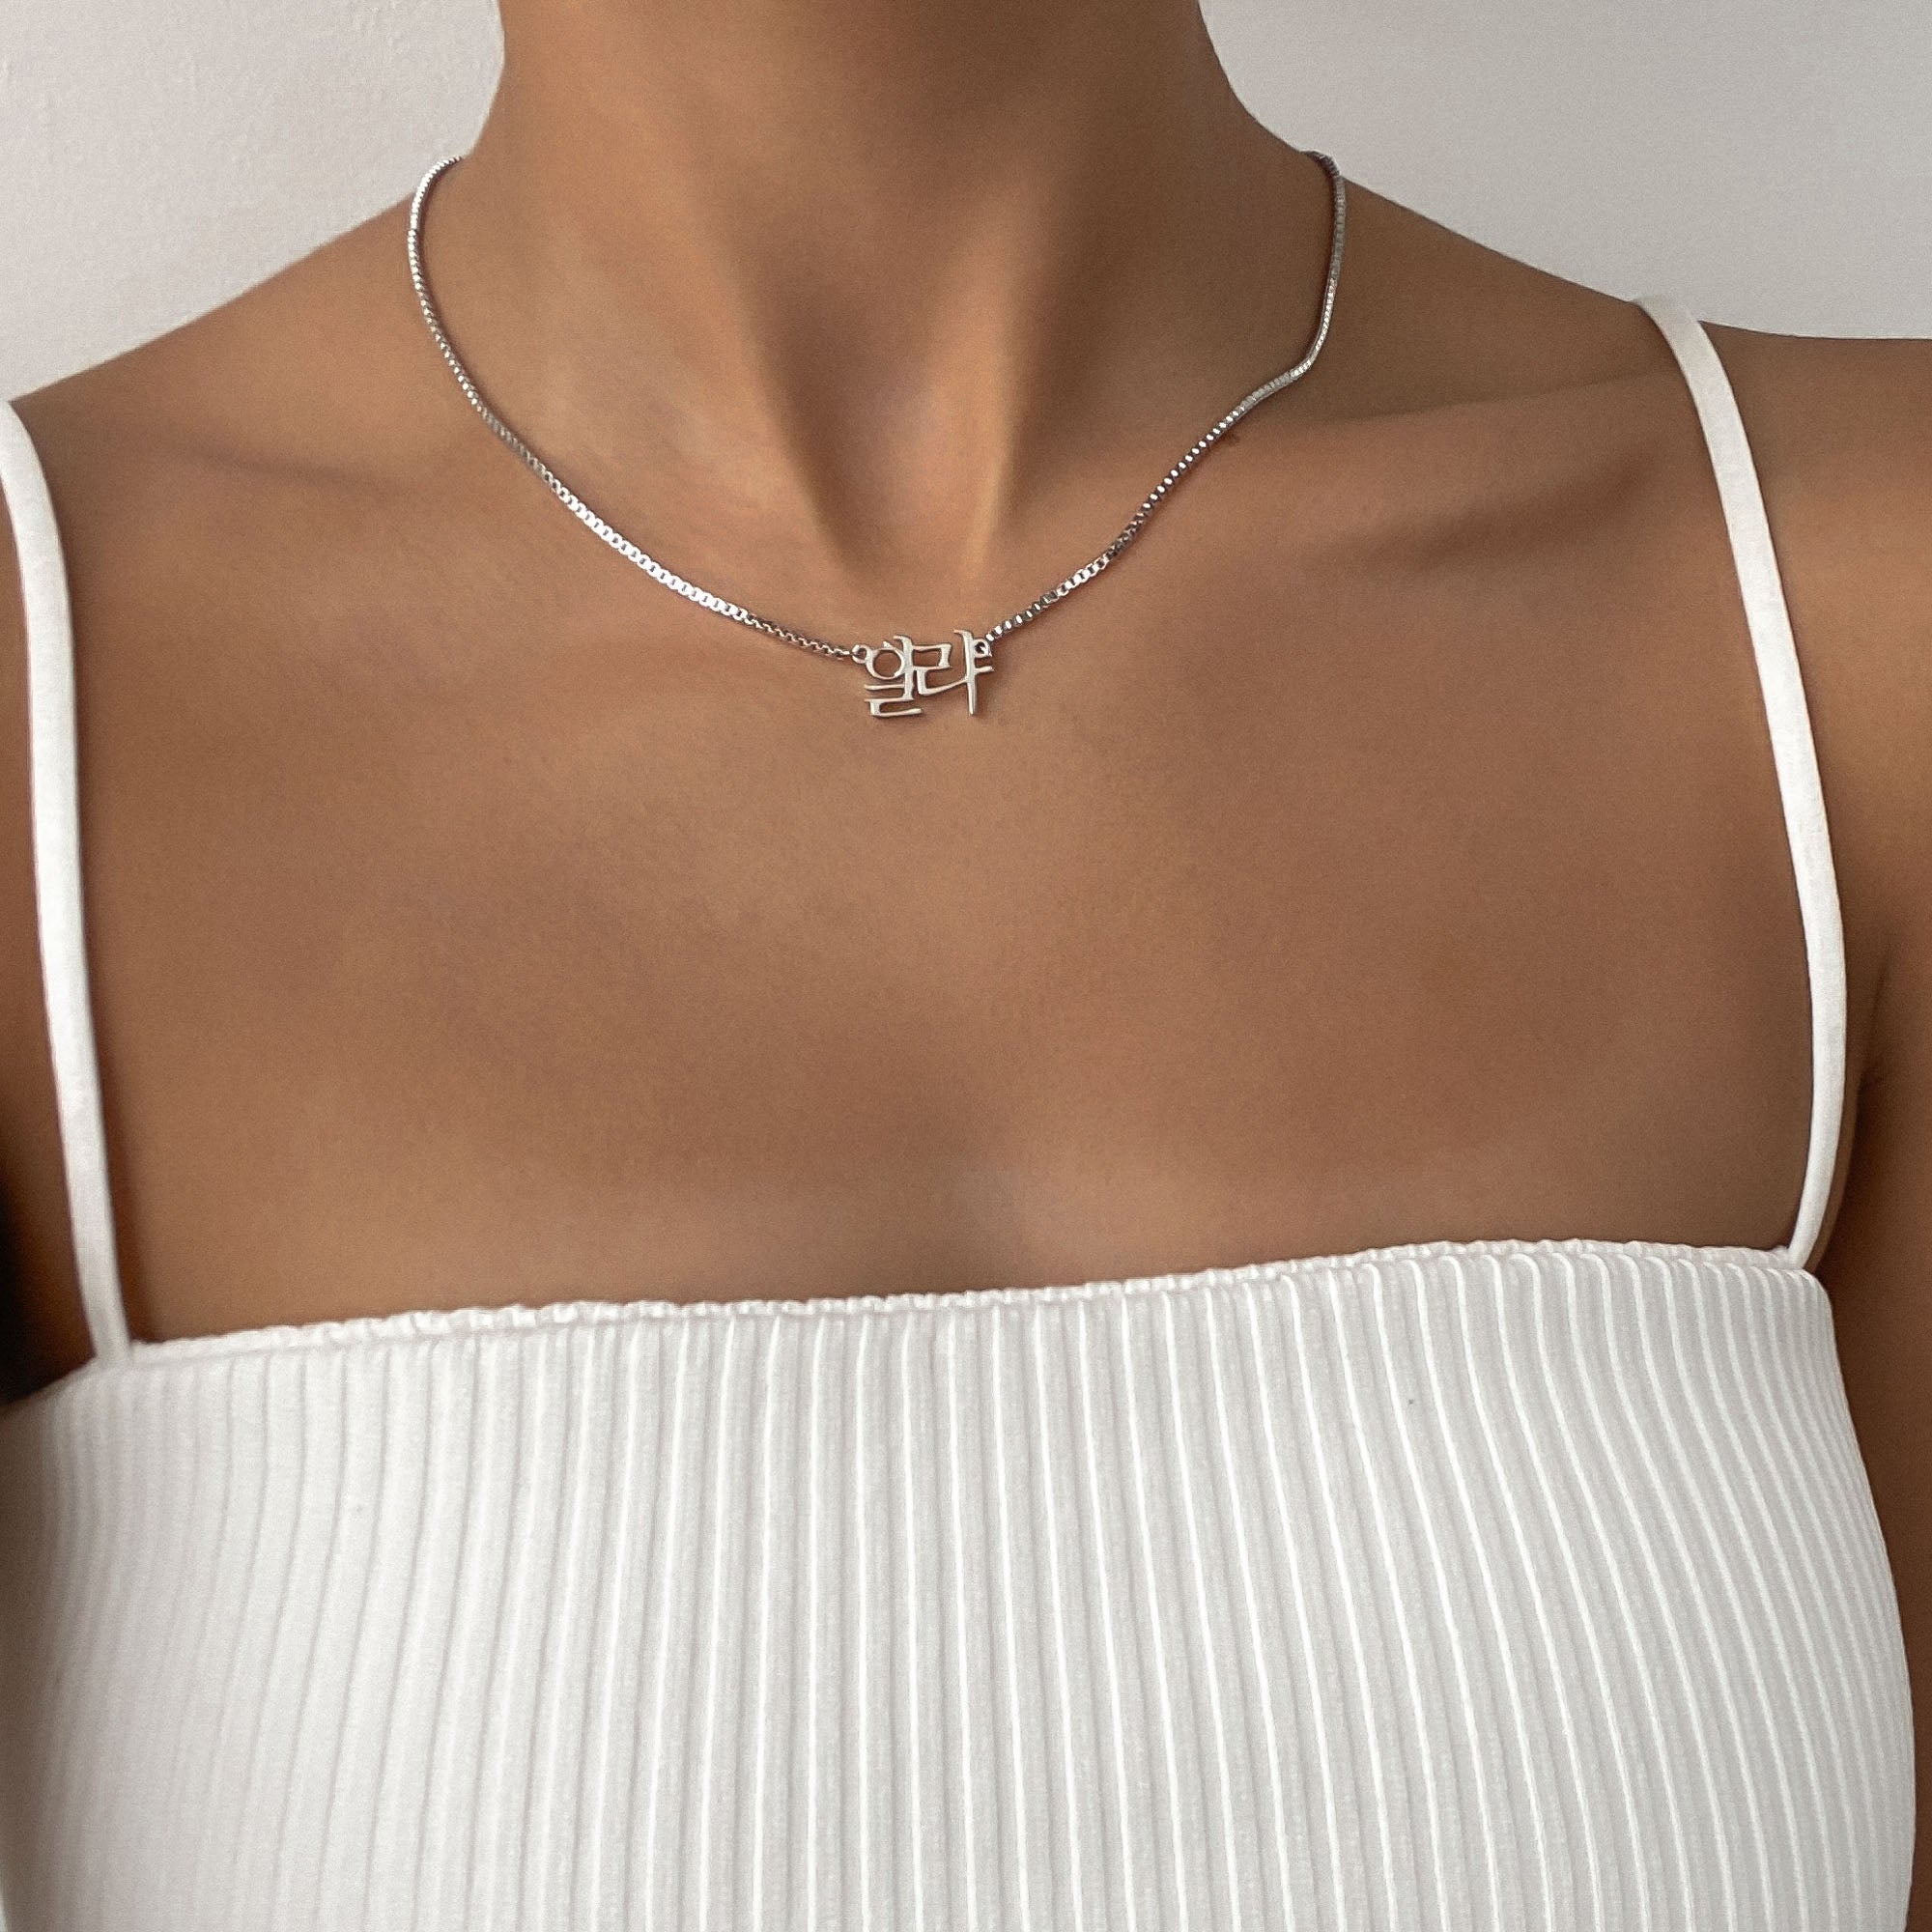 Woman wearing a white strappy top and sporting a silver Korean name necklace